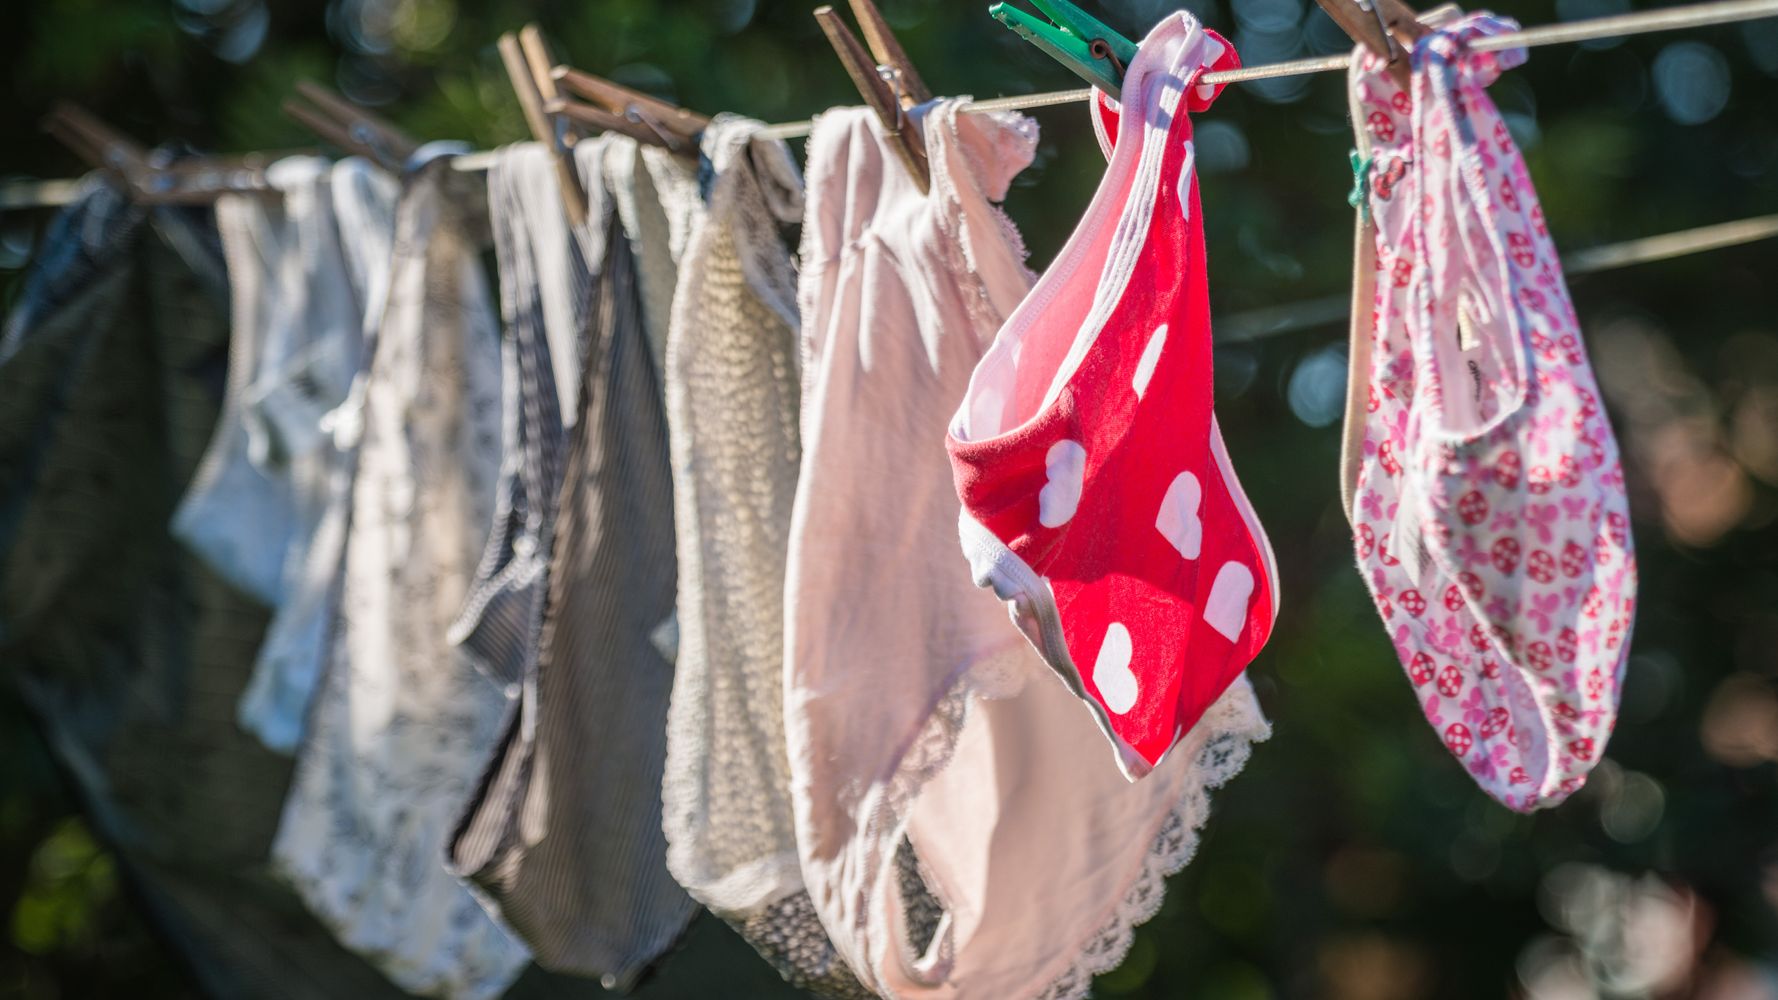 6 Gynecologists Recommend The Best Underwear For Your Health Down